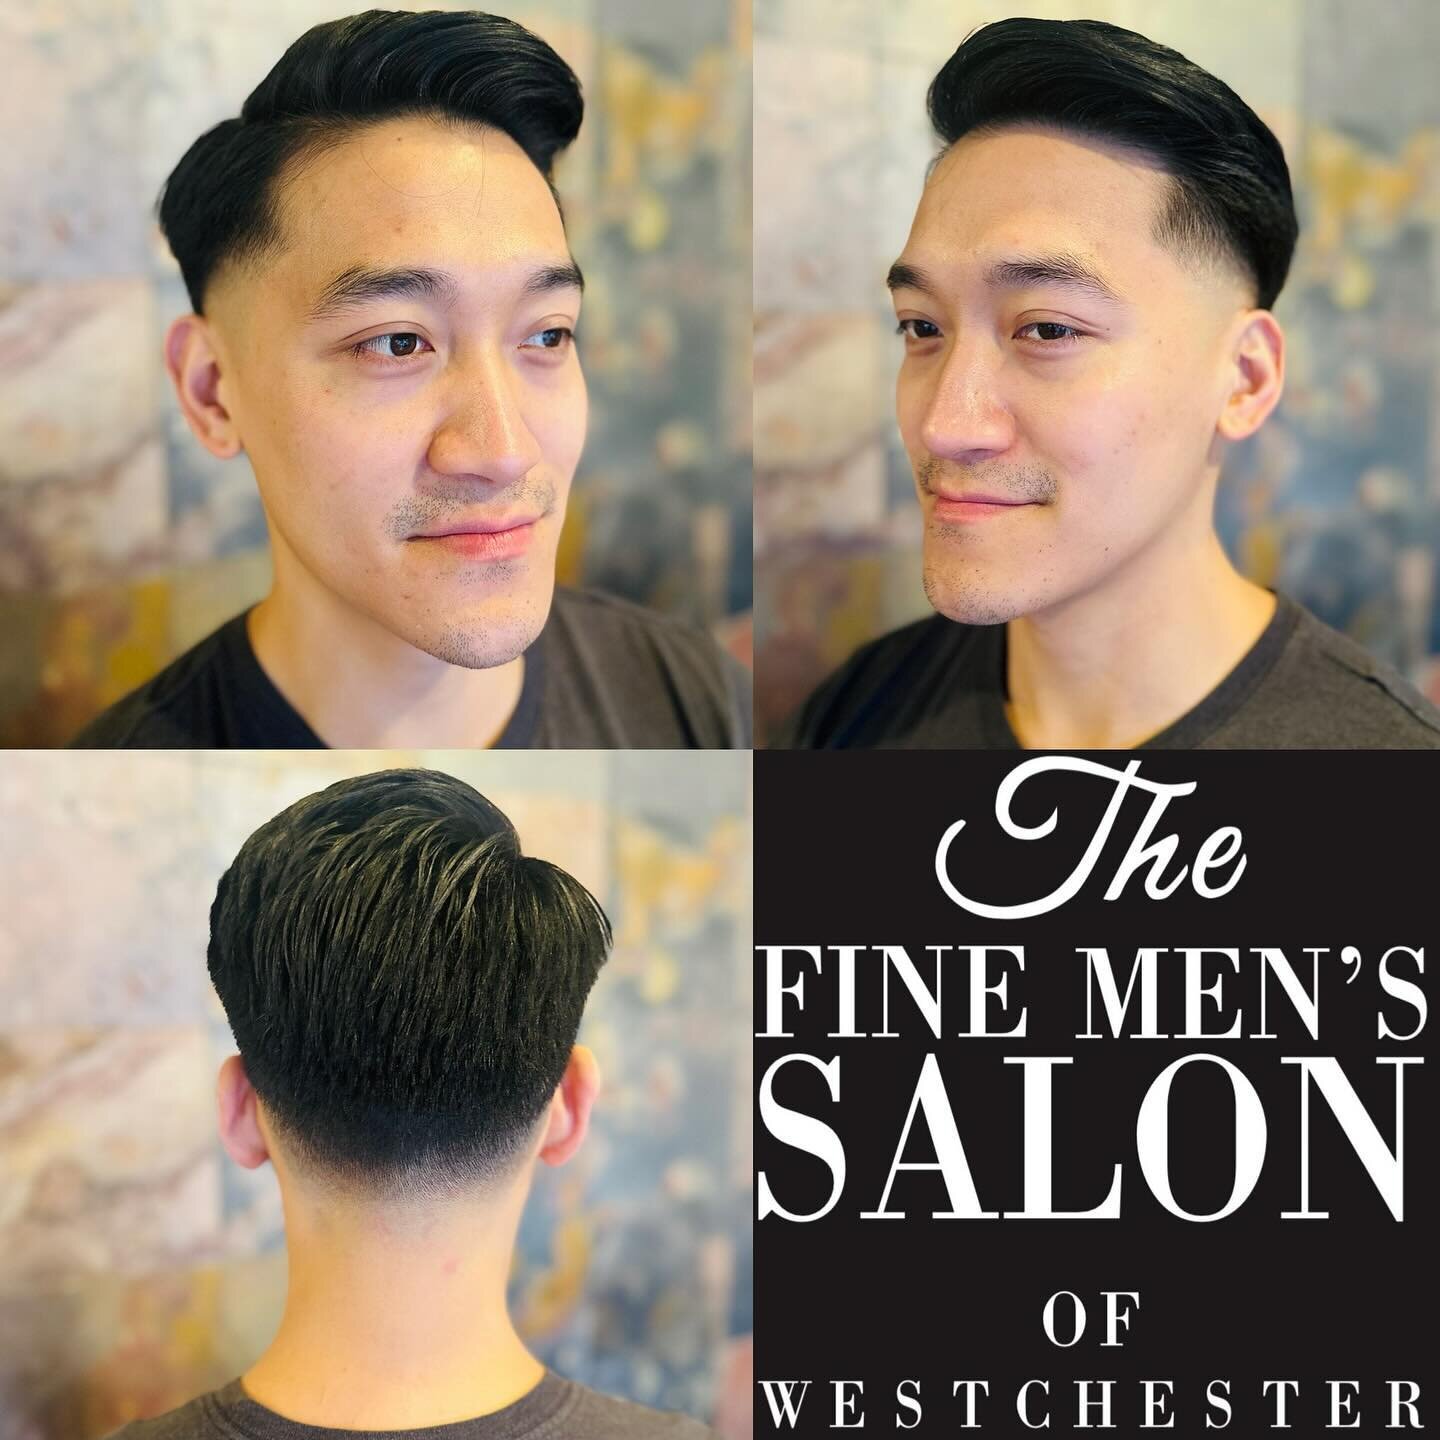 For every great man, there's an even greater haircut. 💪
✨Haircut | Style by Neli
✨Reserve Online at Link in Bio or at thefinemenssalon.com
✨Call or Text 914-412-7755
✨Walk In Tuesday thru Saturday!
❤️We Love Men&rsquo;s Grooming! ❤️
✨
#gentlemenstyl